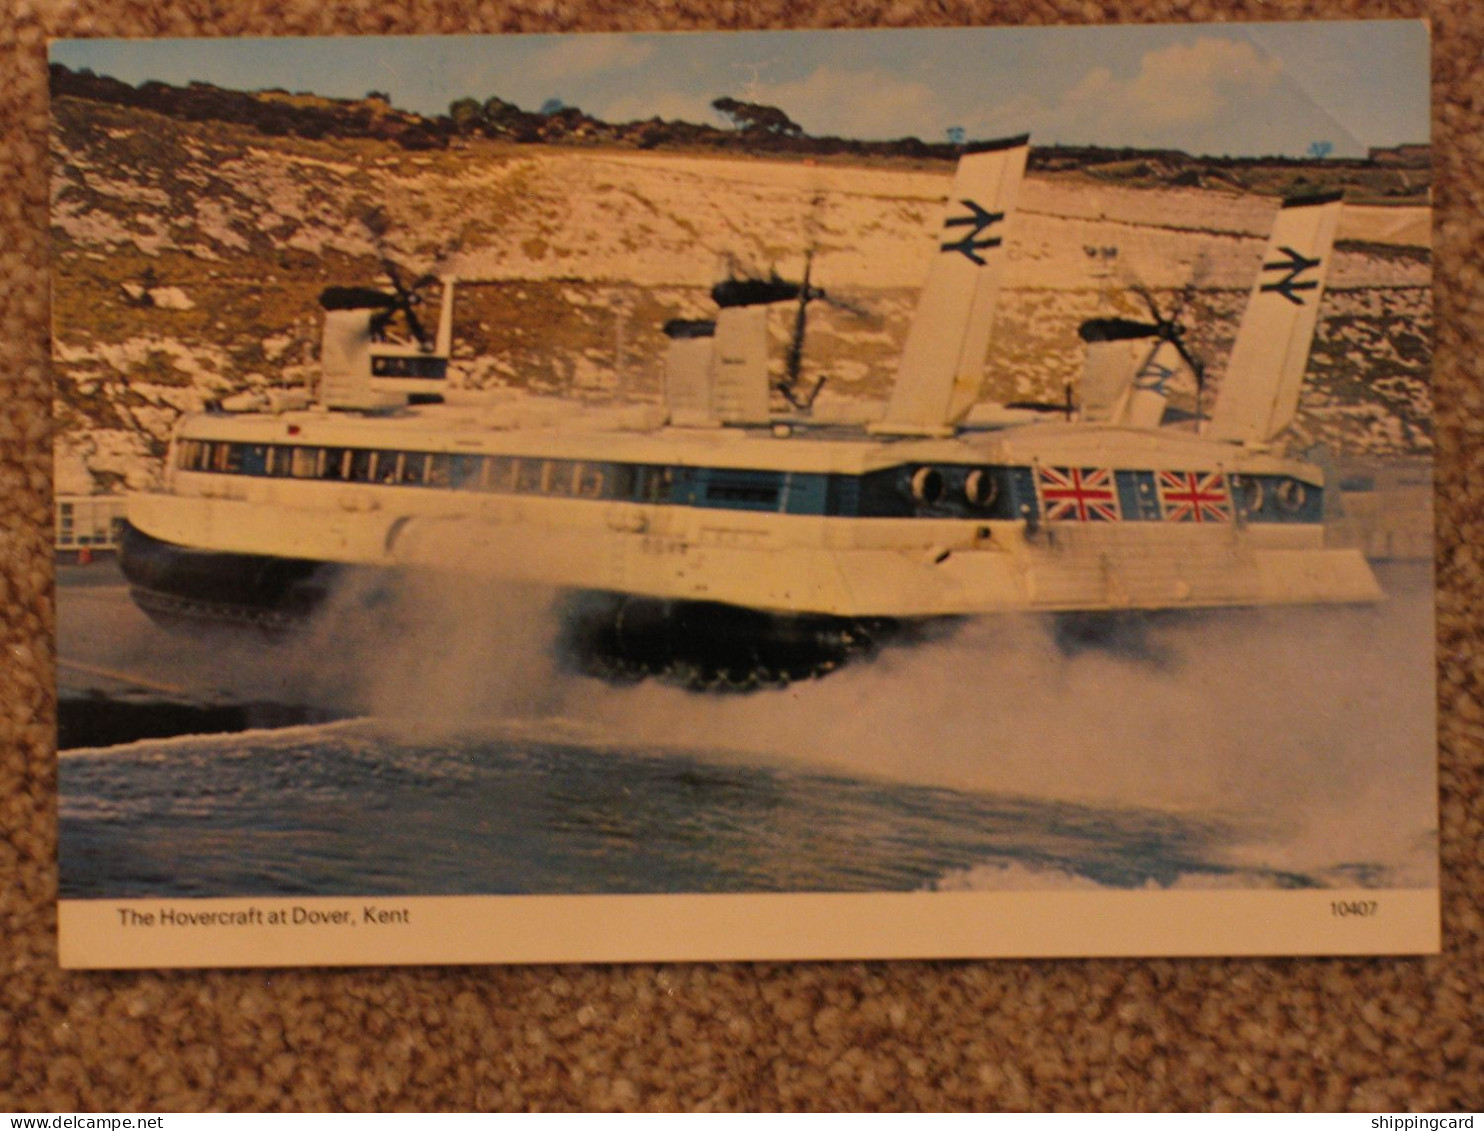 SEASPEED HOVERCRAFT AT DOVER - Hovercrafts